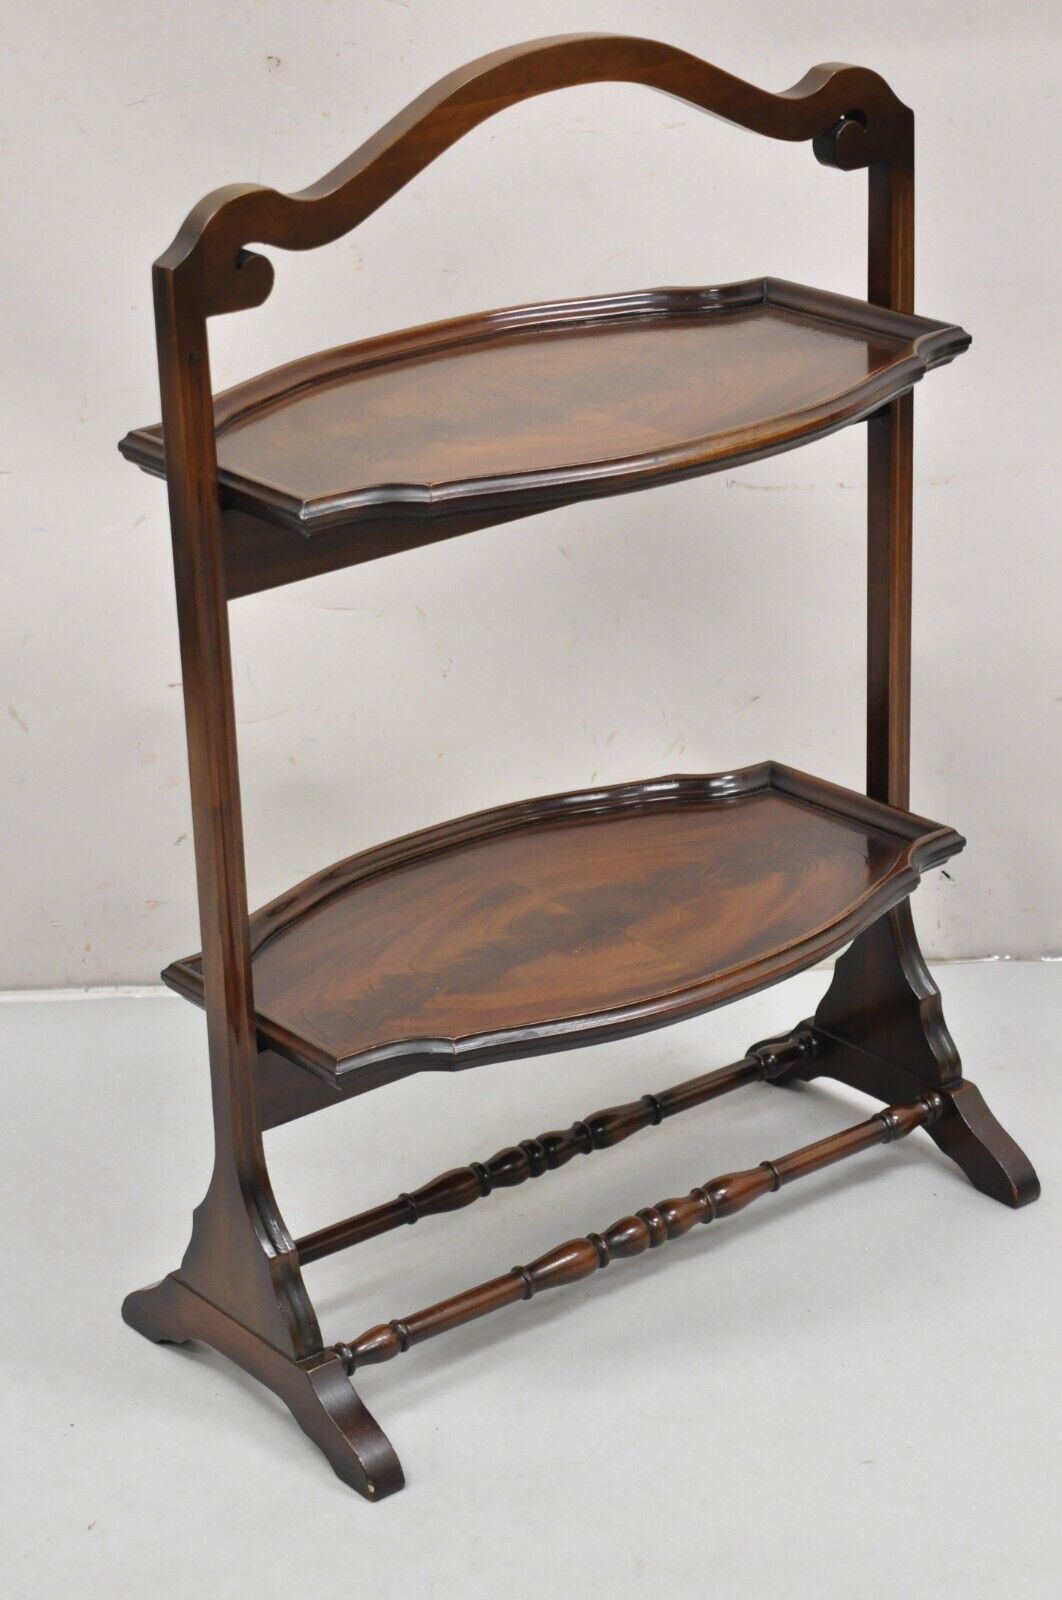 Vintage Regency Style Mahogany 2 Tier Folding Muffin Cake Stand Side Table